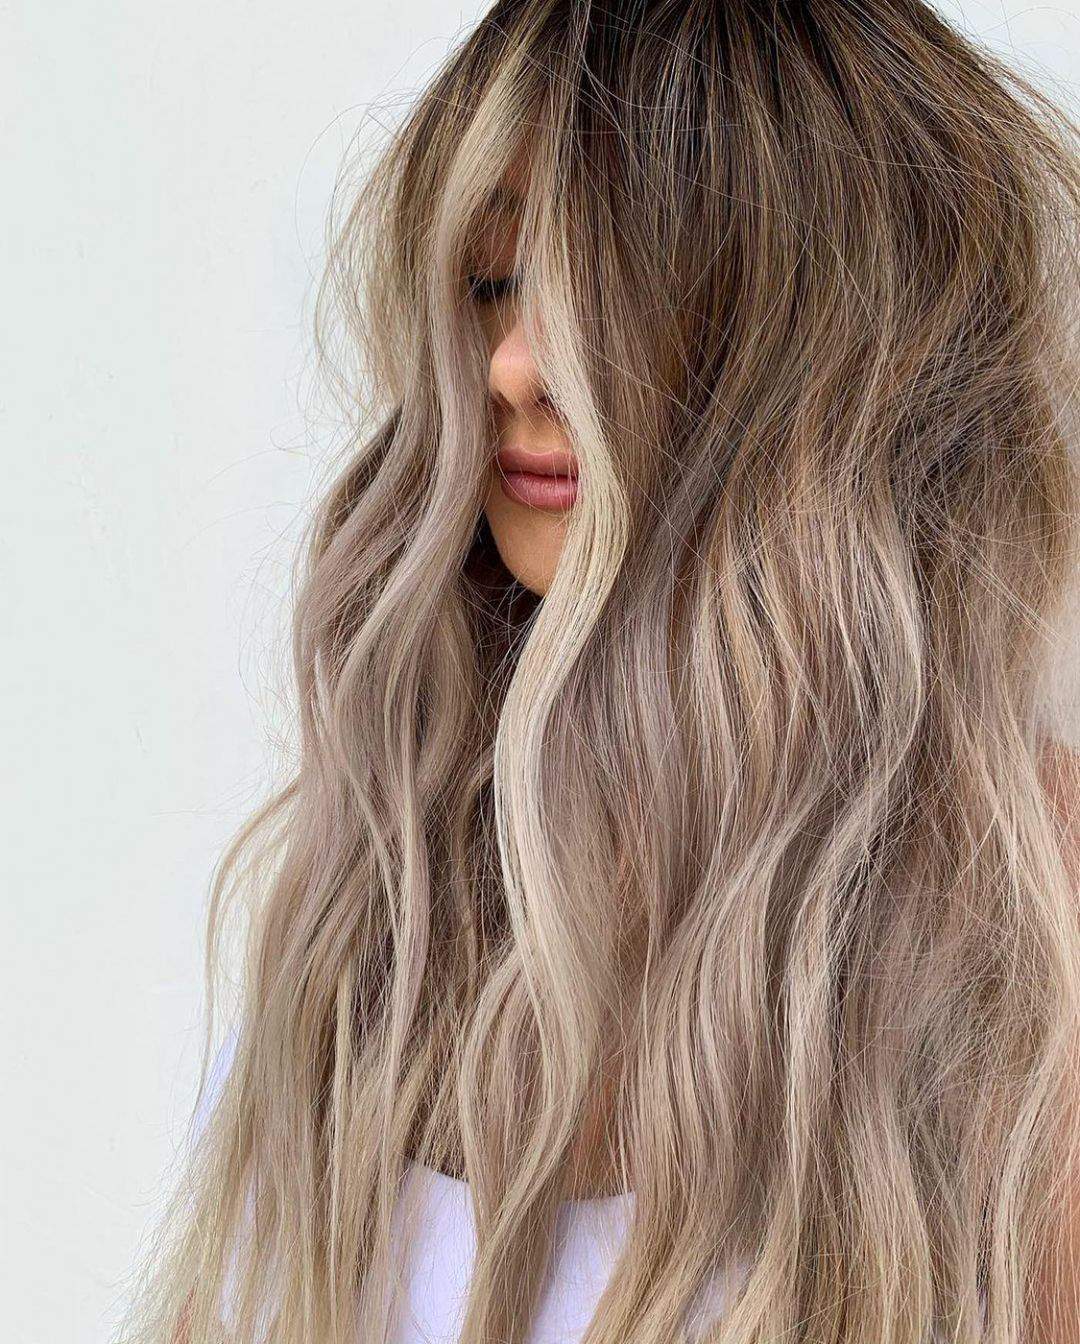 40+ Awesome Hairstyles For Girls With Long Hair images 7